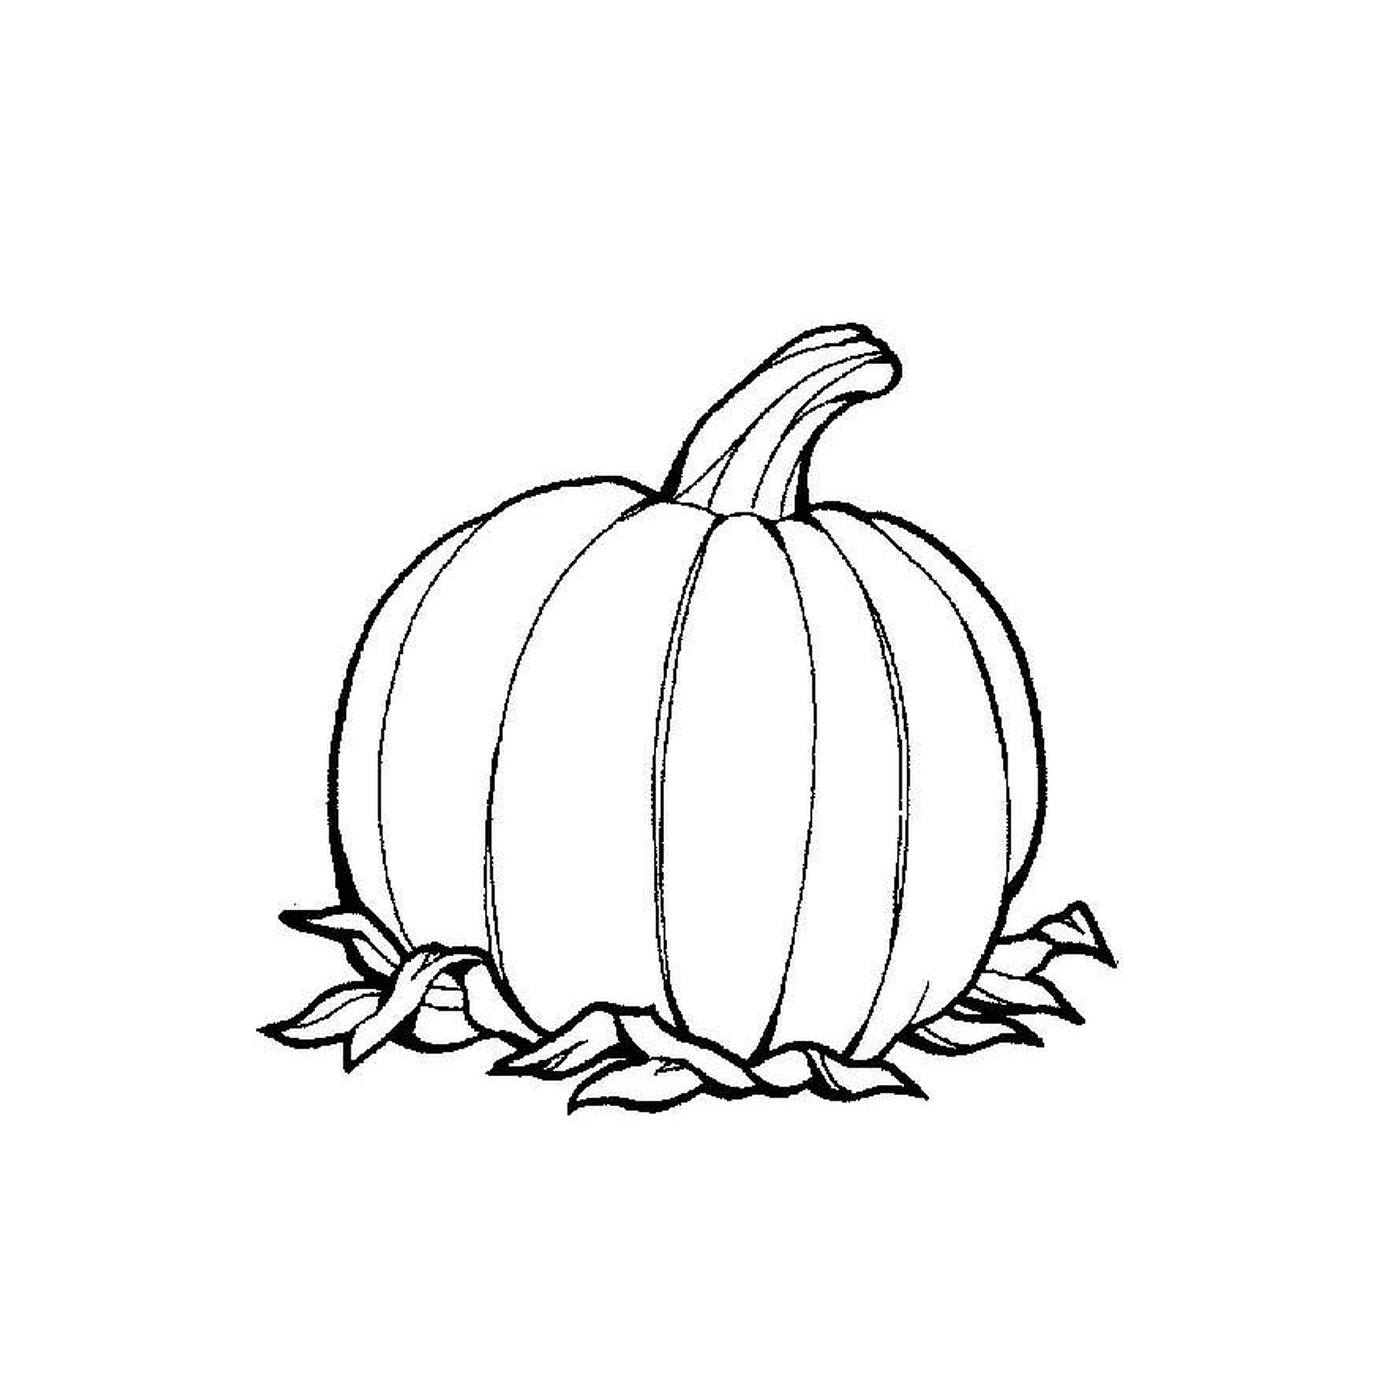  Pumpkin with leaves around 